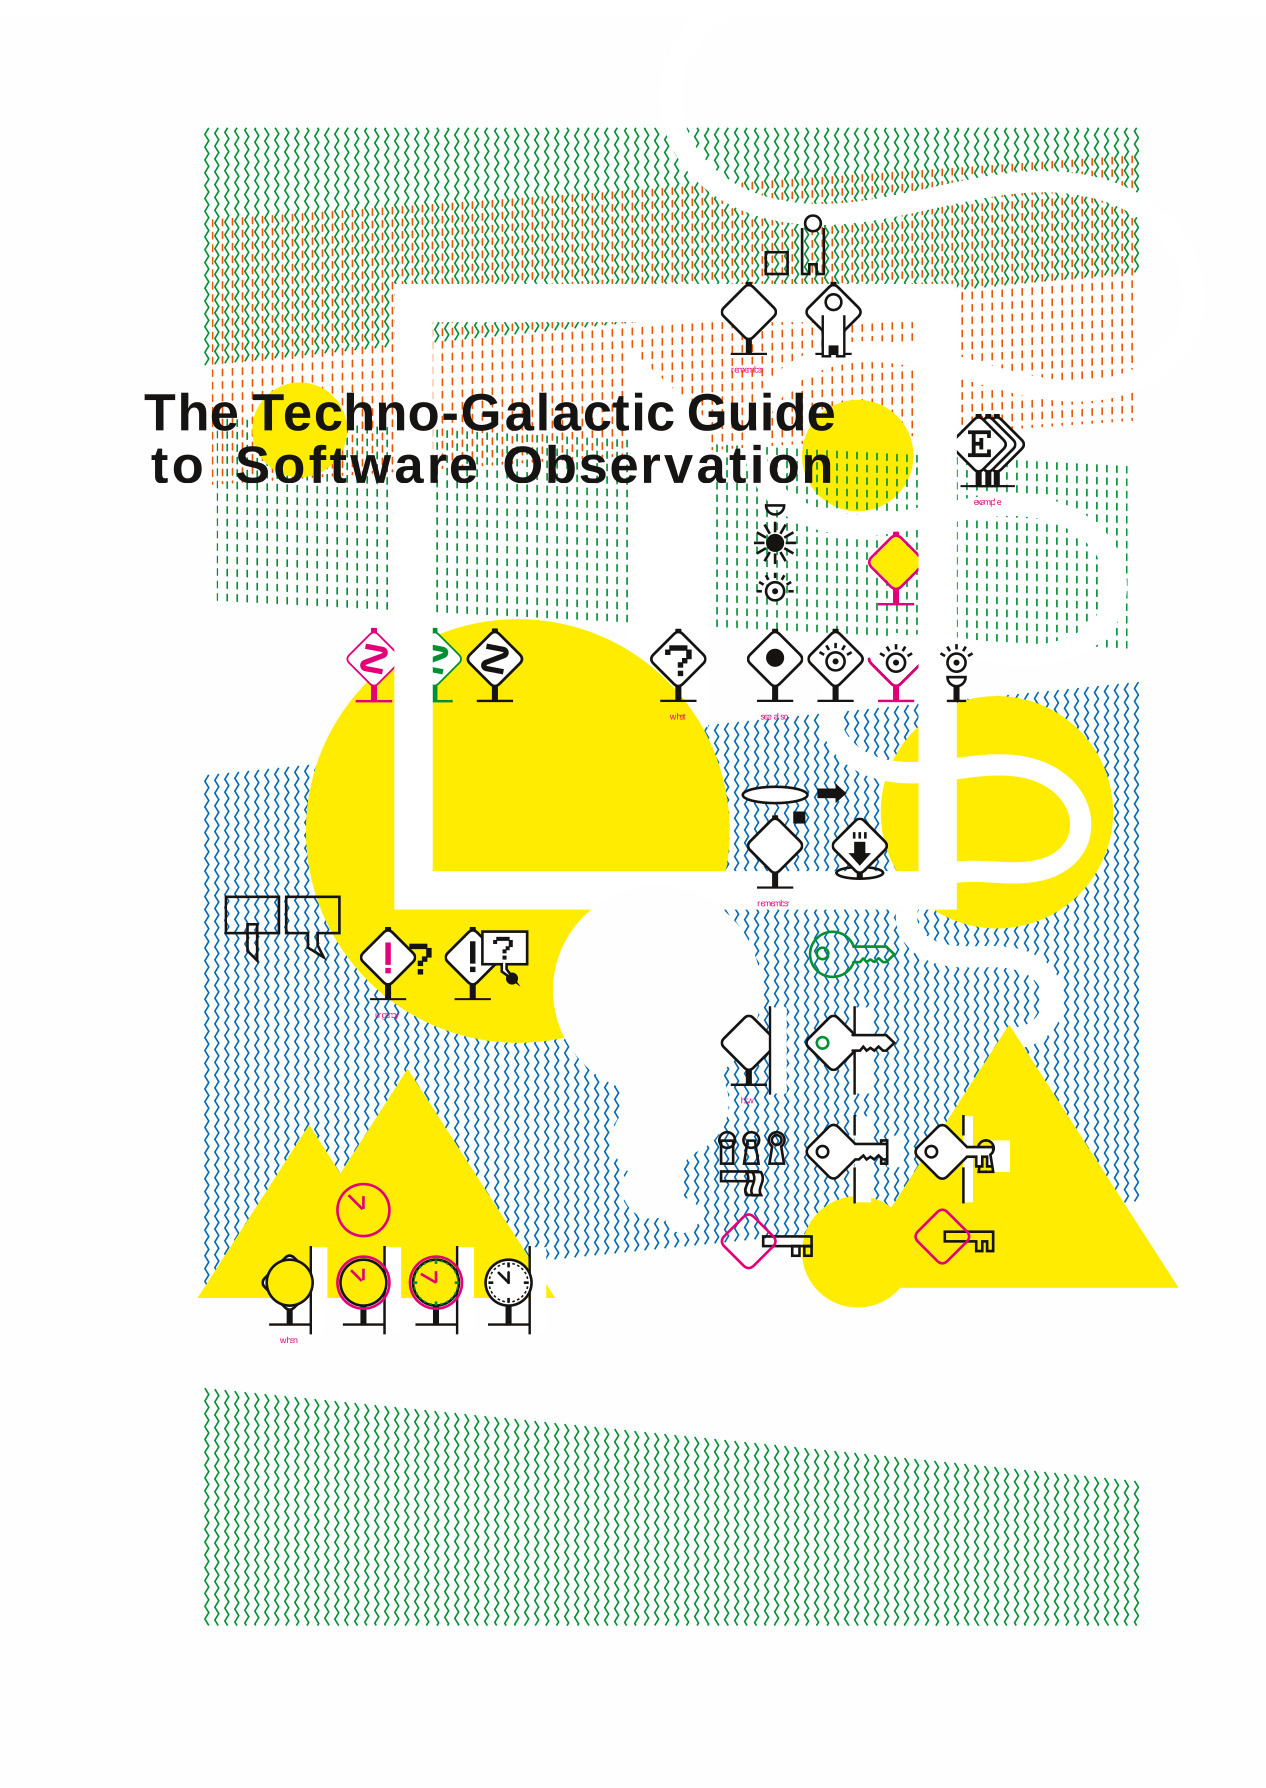 The Techno-Galactic Guide to Software Observation